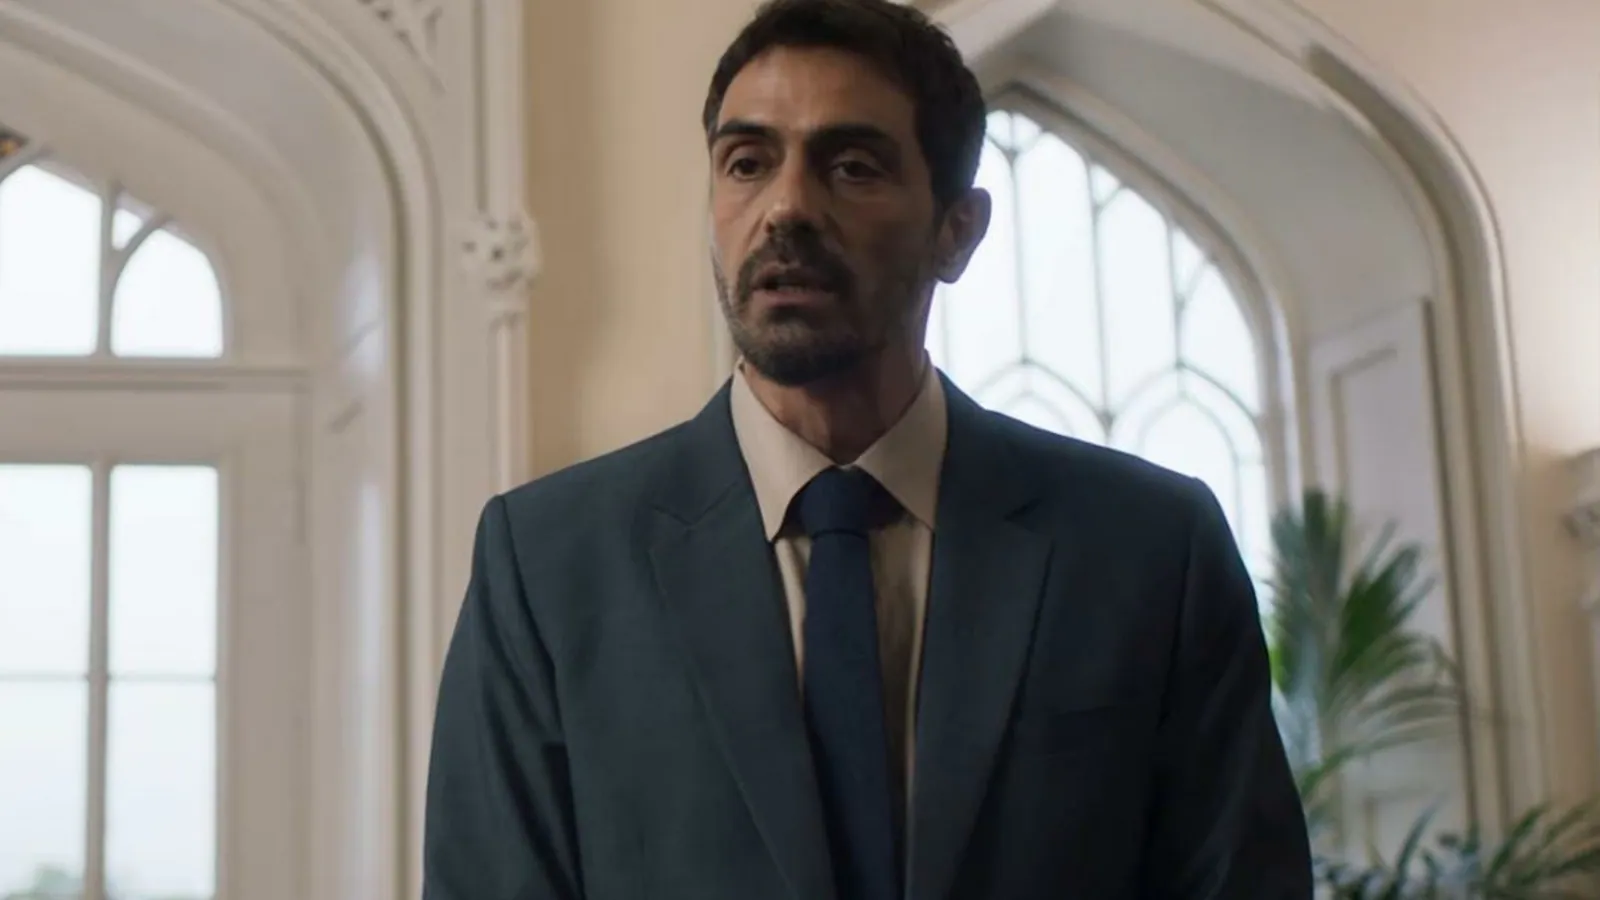 London Files teaser: Arjun Rampal’s detective uncovers dark mystery while on hunt for a missing girl. Watch